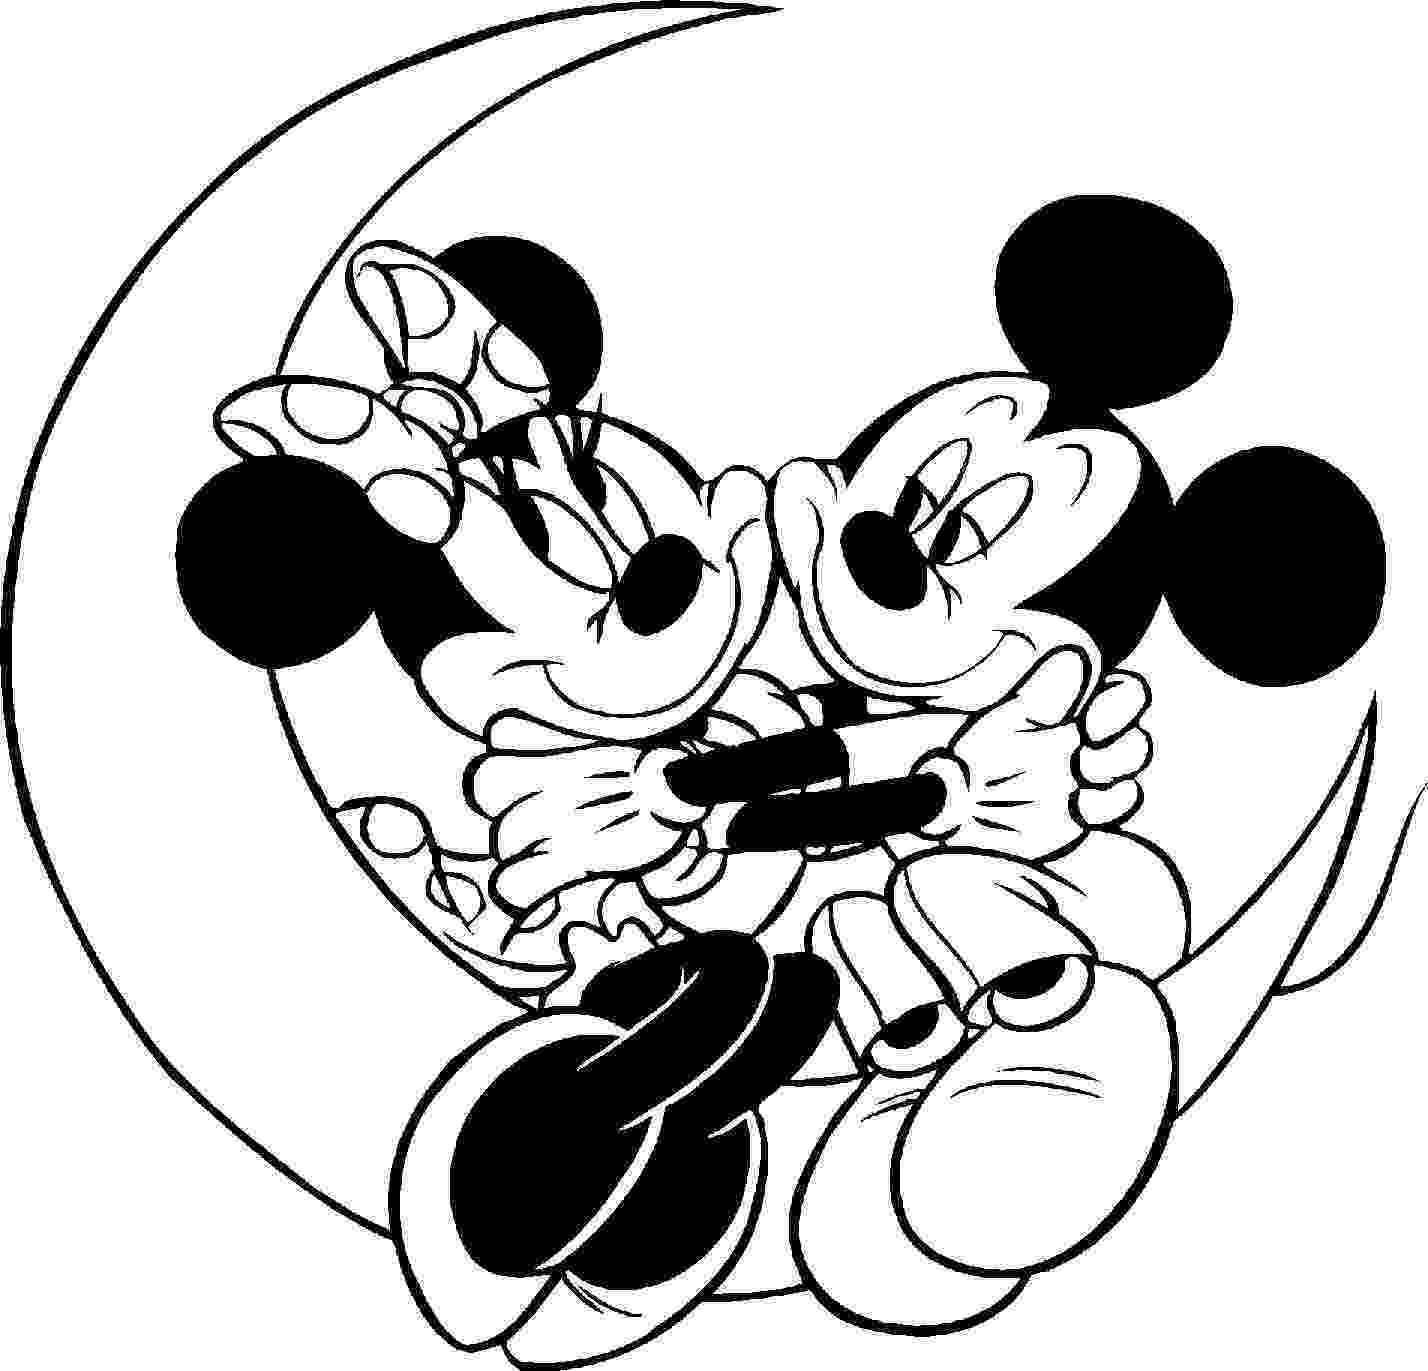 mickey and minnie colouring pages july 2011 colouring minnie and pages mickey 